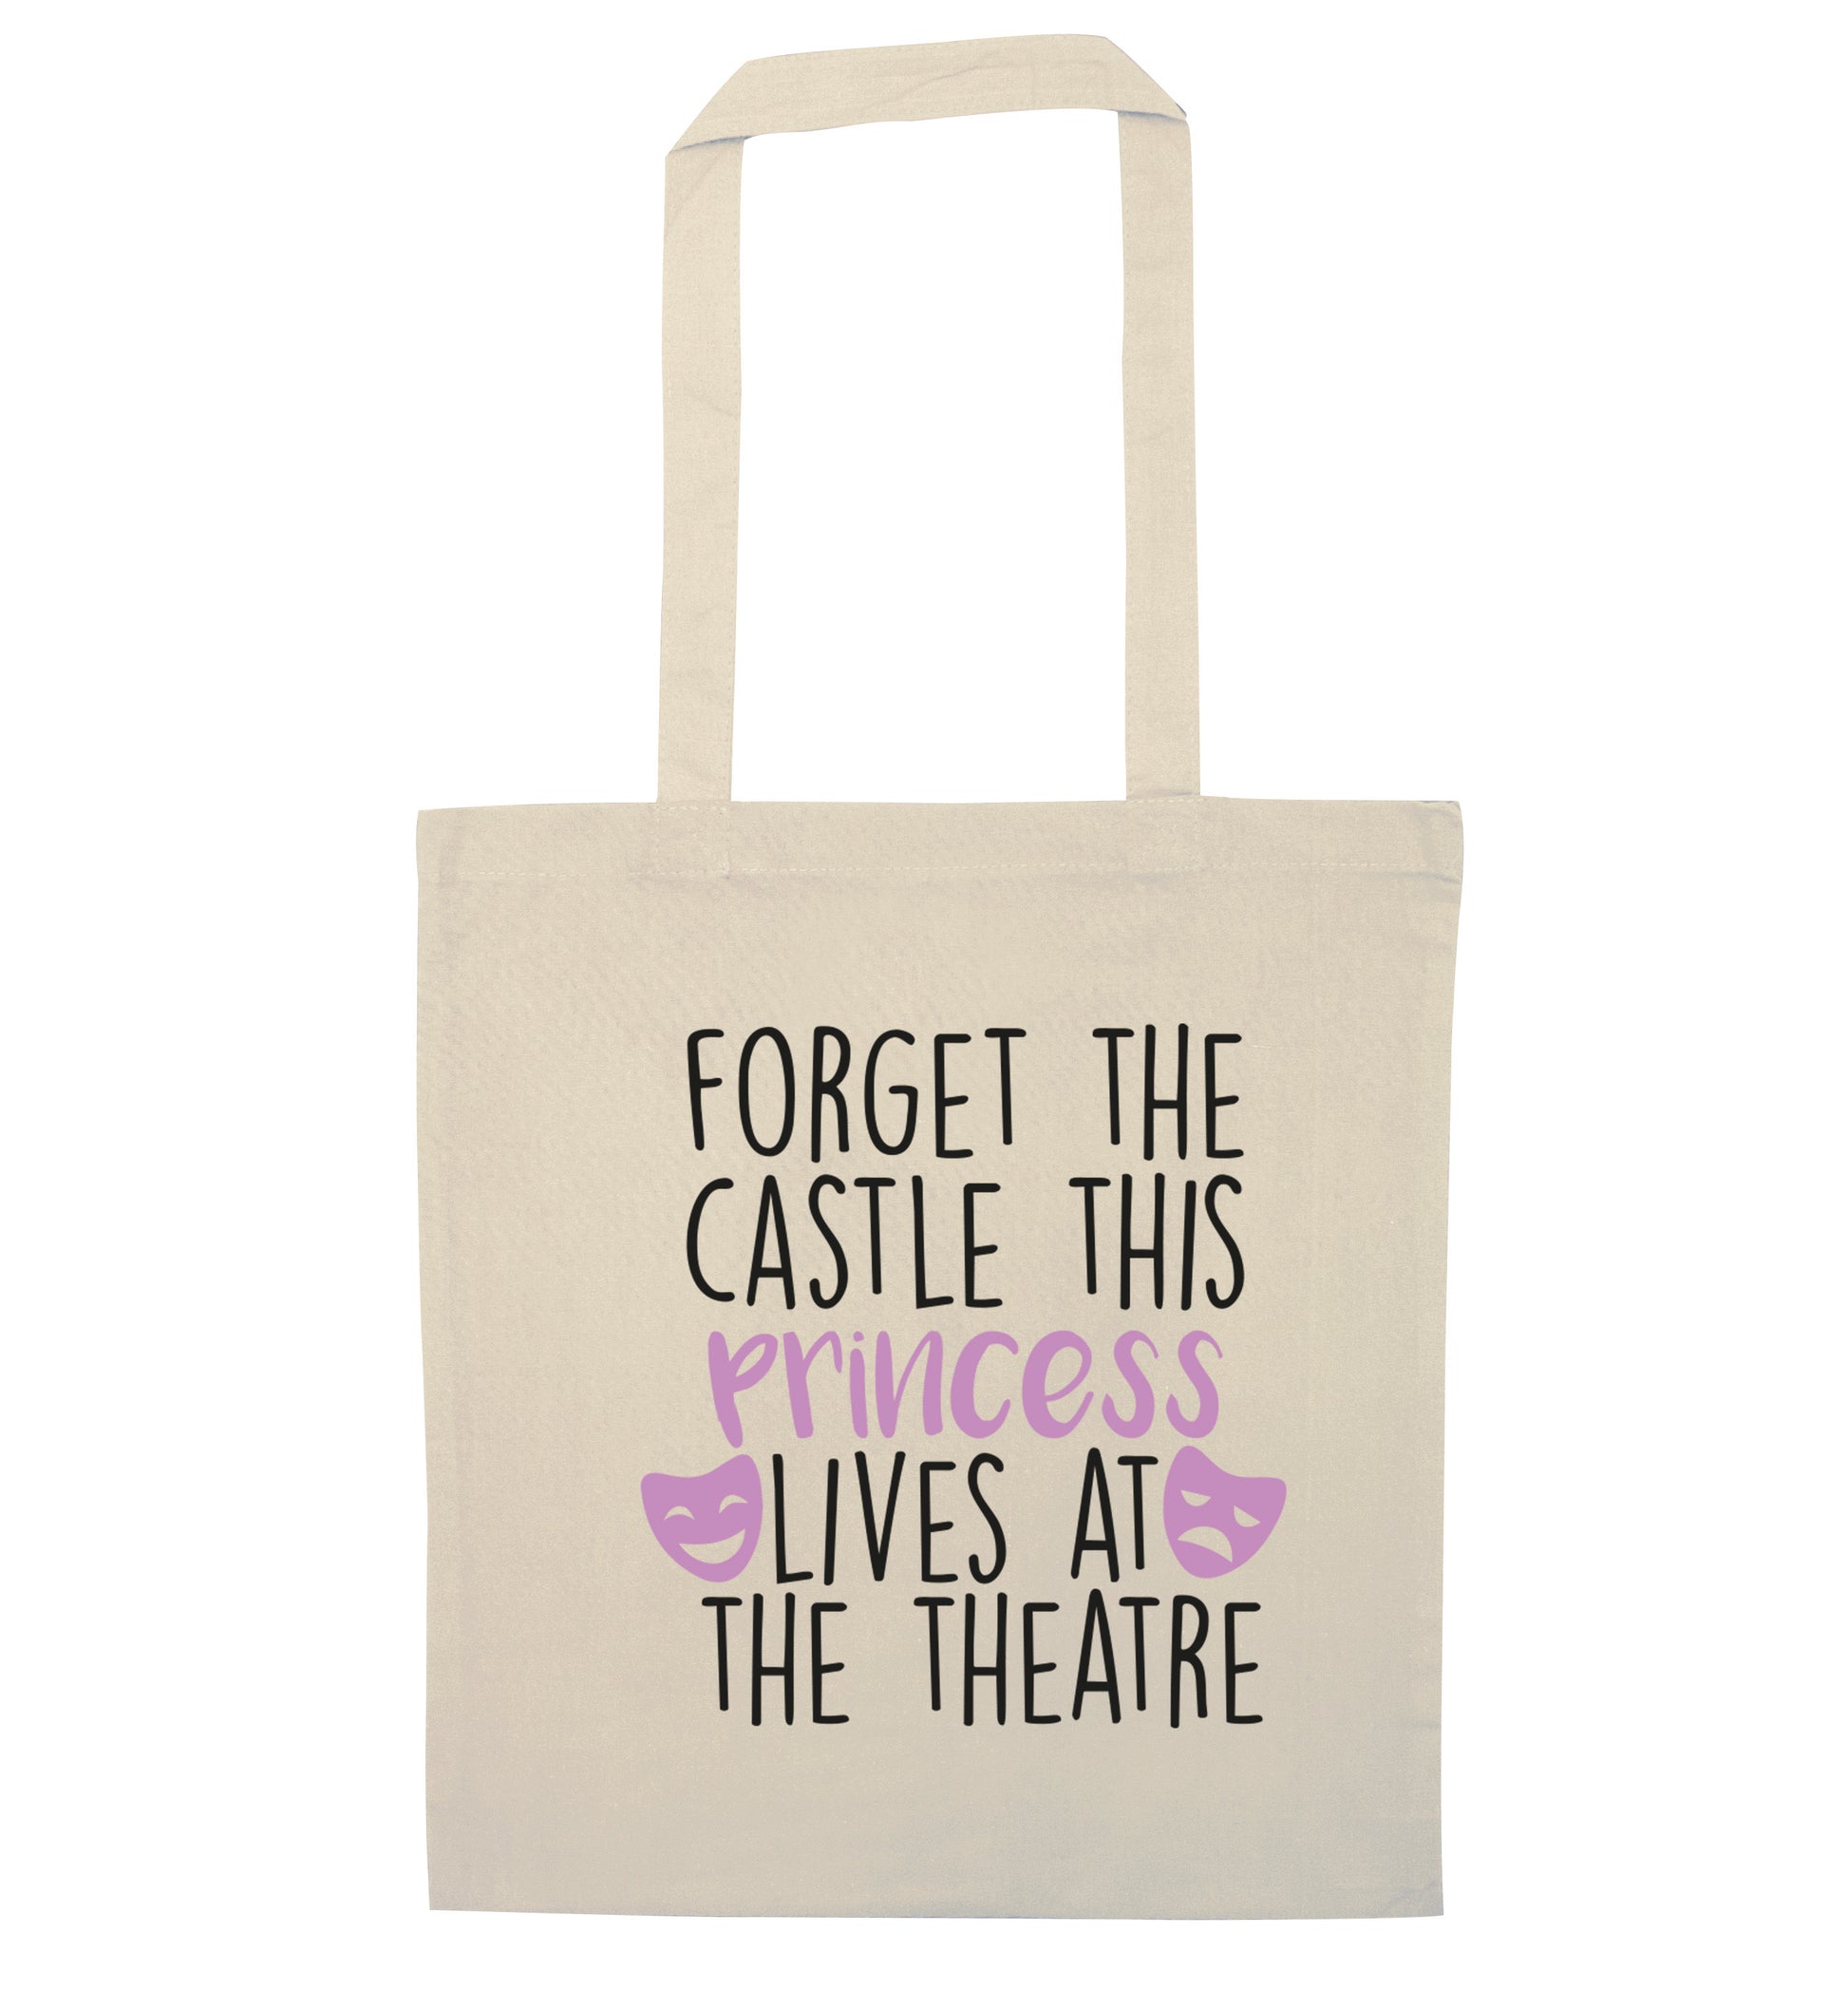 Forget the castle this princess lives at the theatre natural tote bag